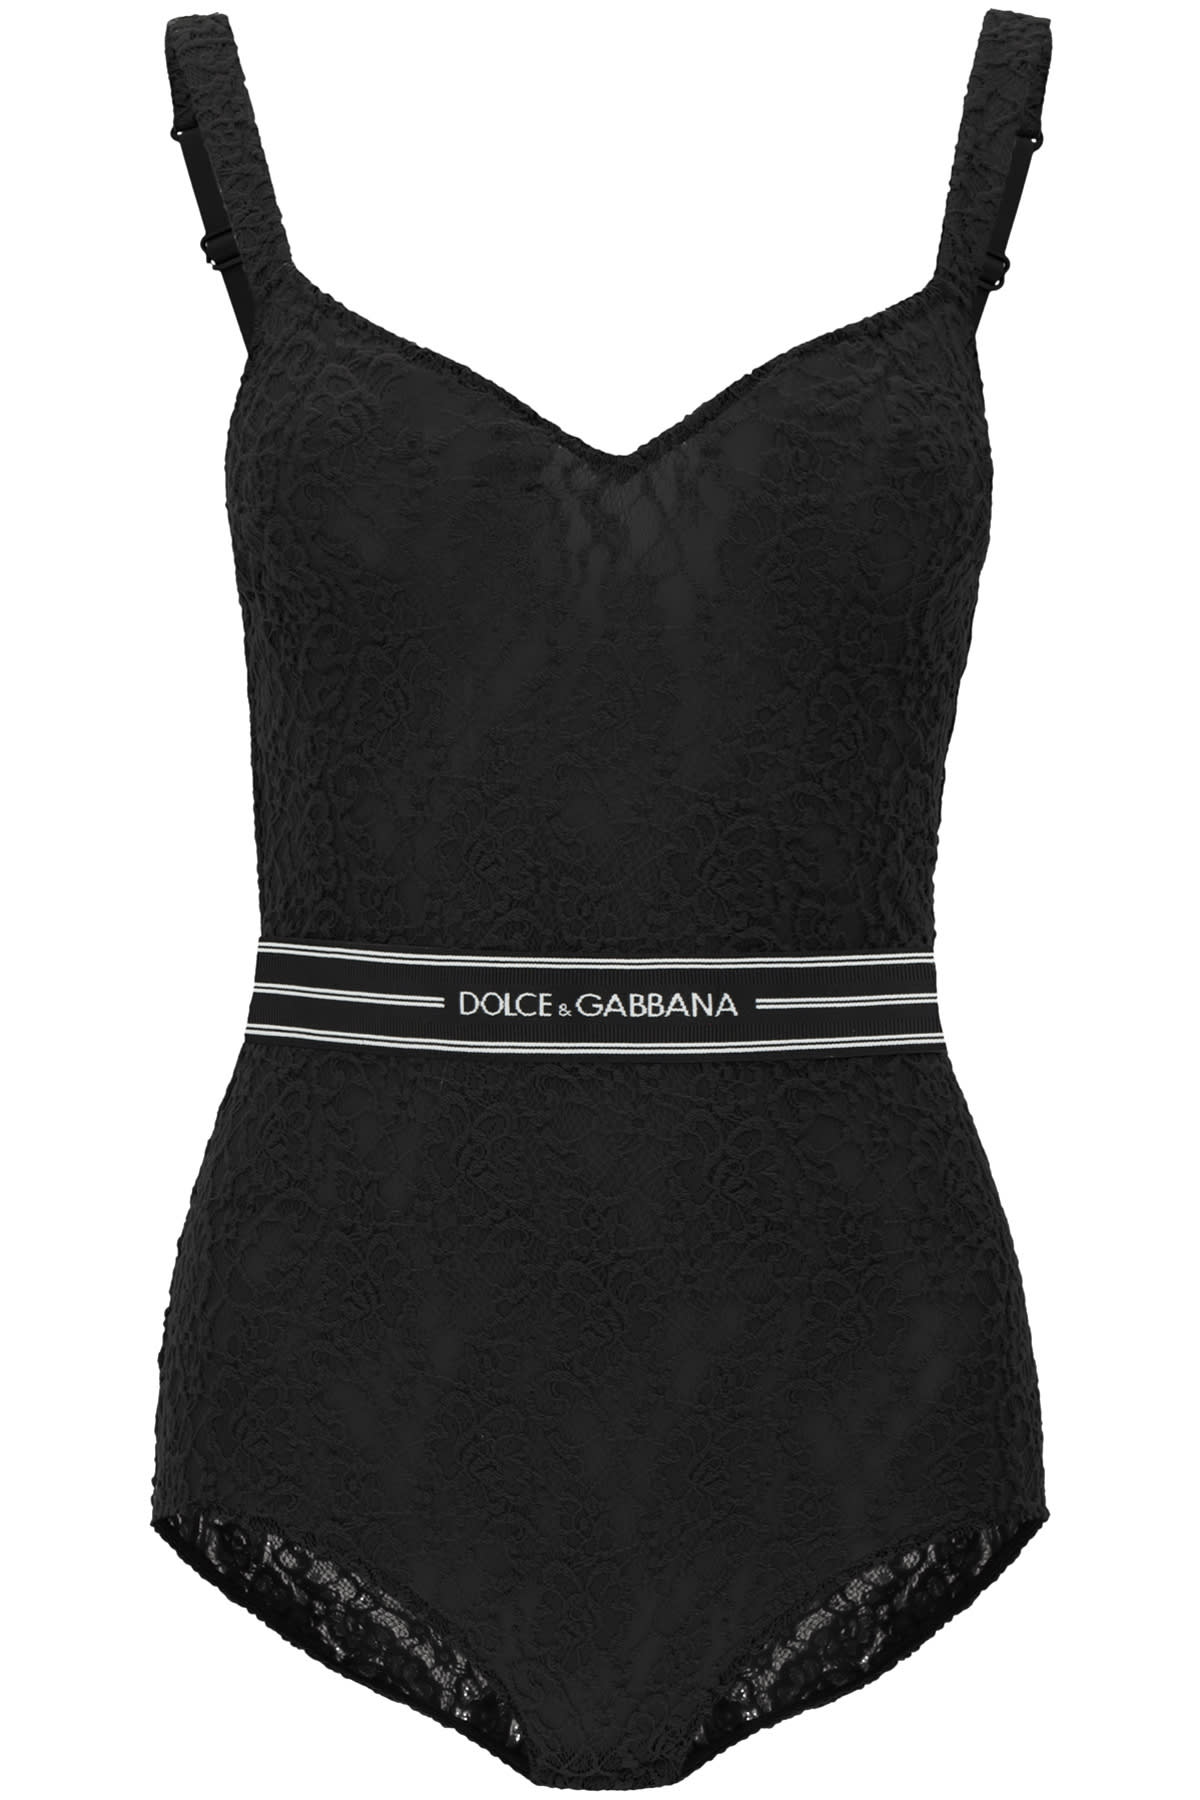 DOLCE & GABBANA LACE BODYSUIT WITH LOGO BAND,O9A14T FLMPS N0000